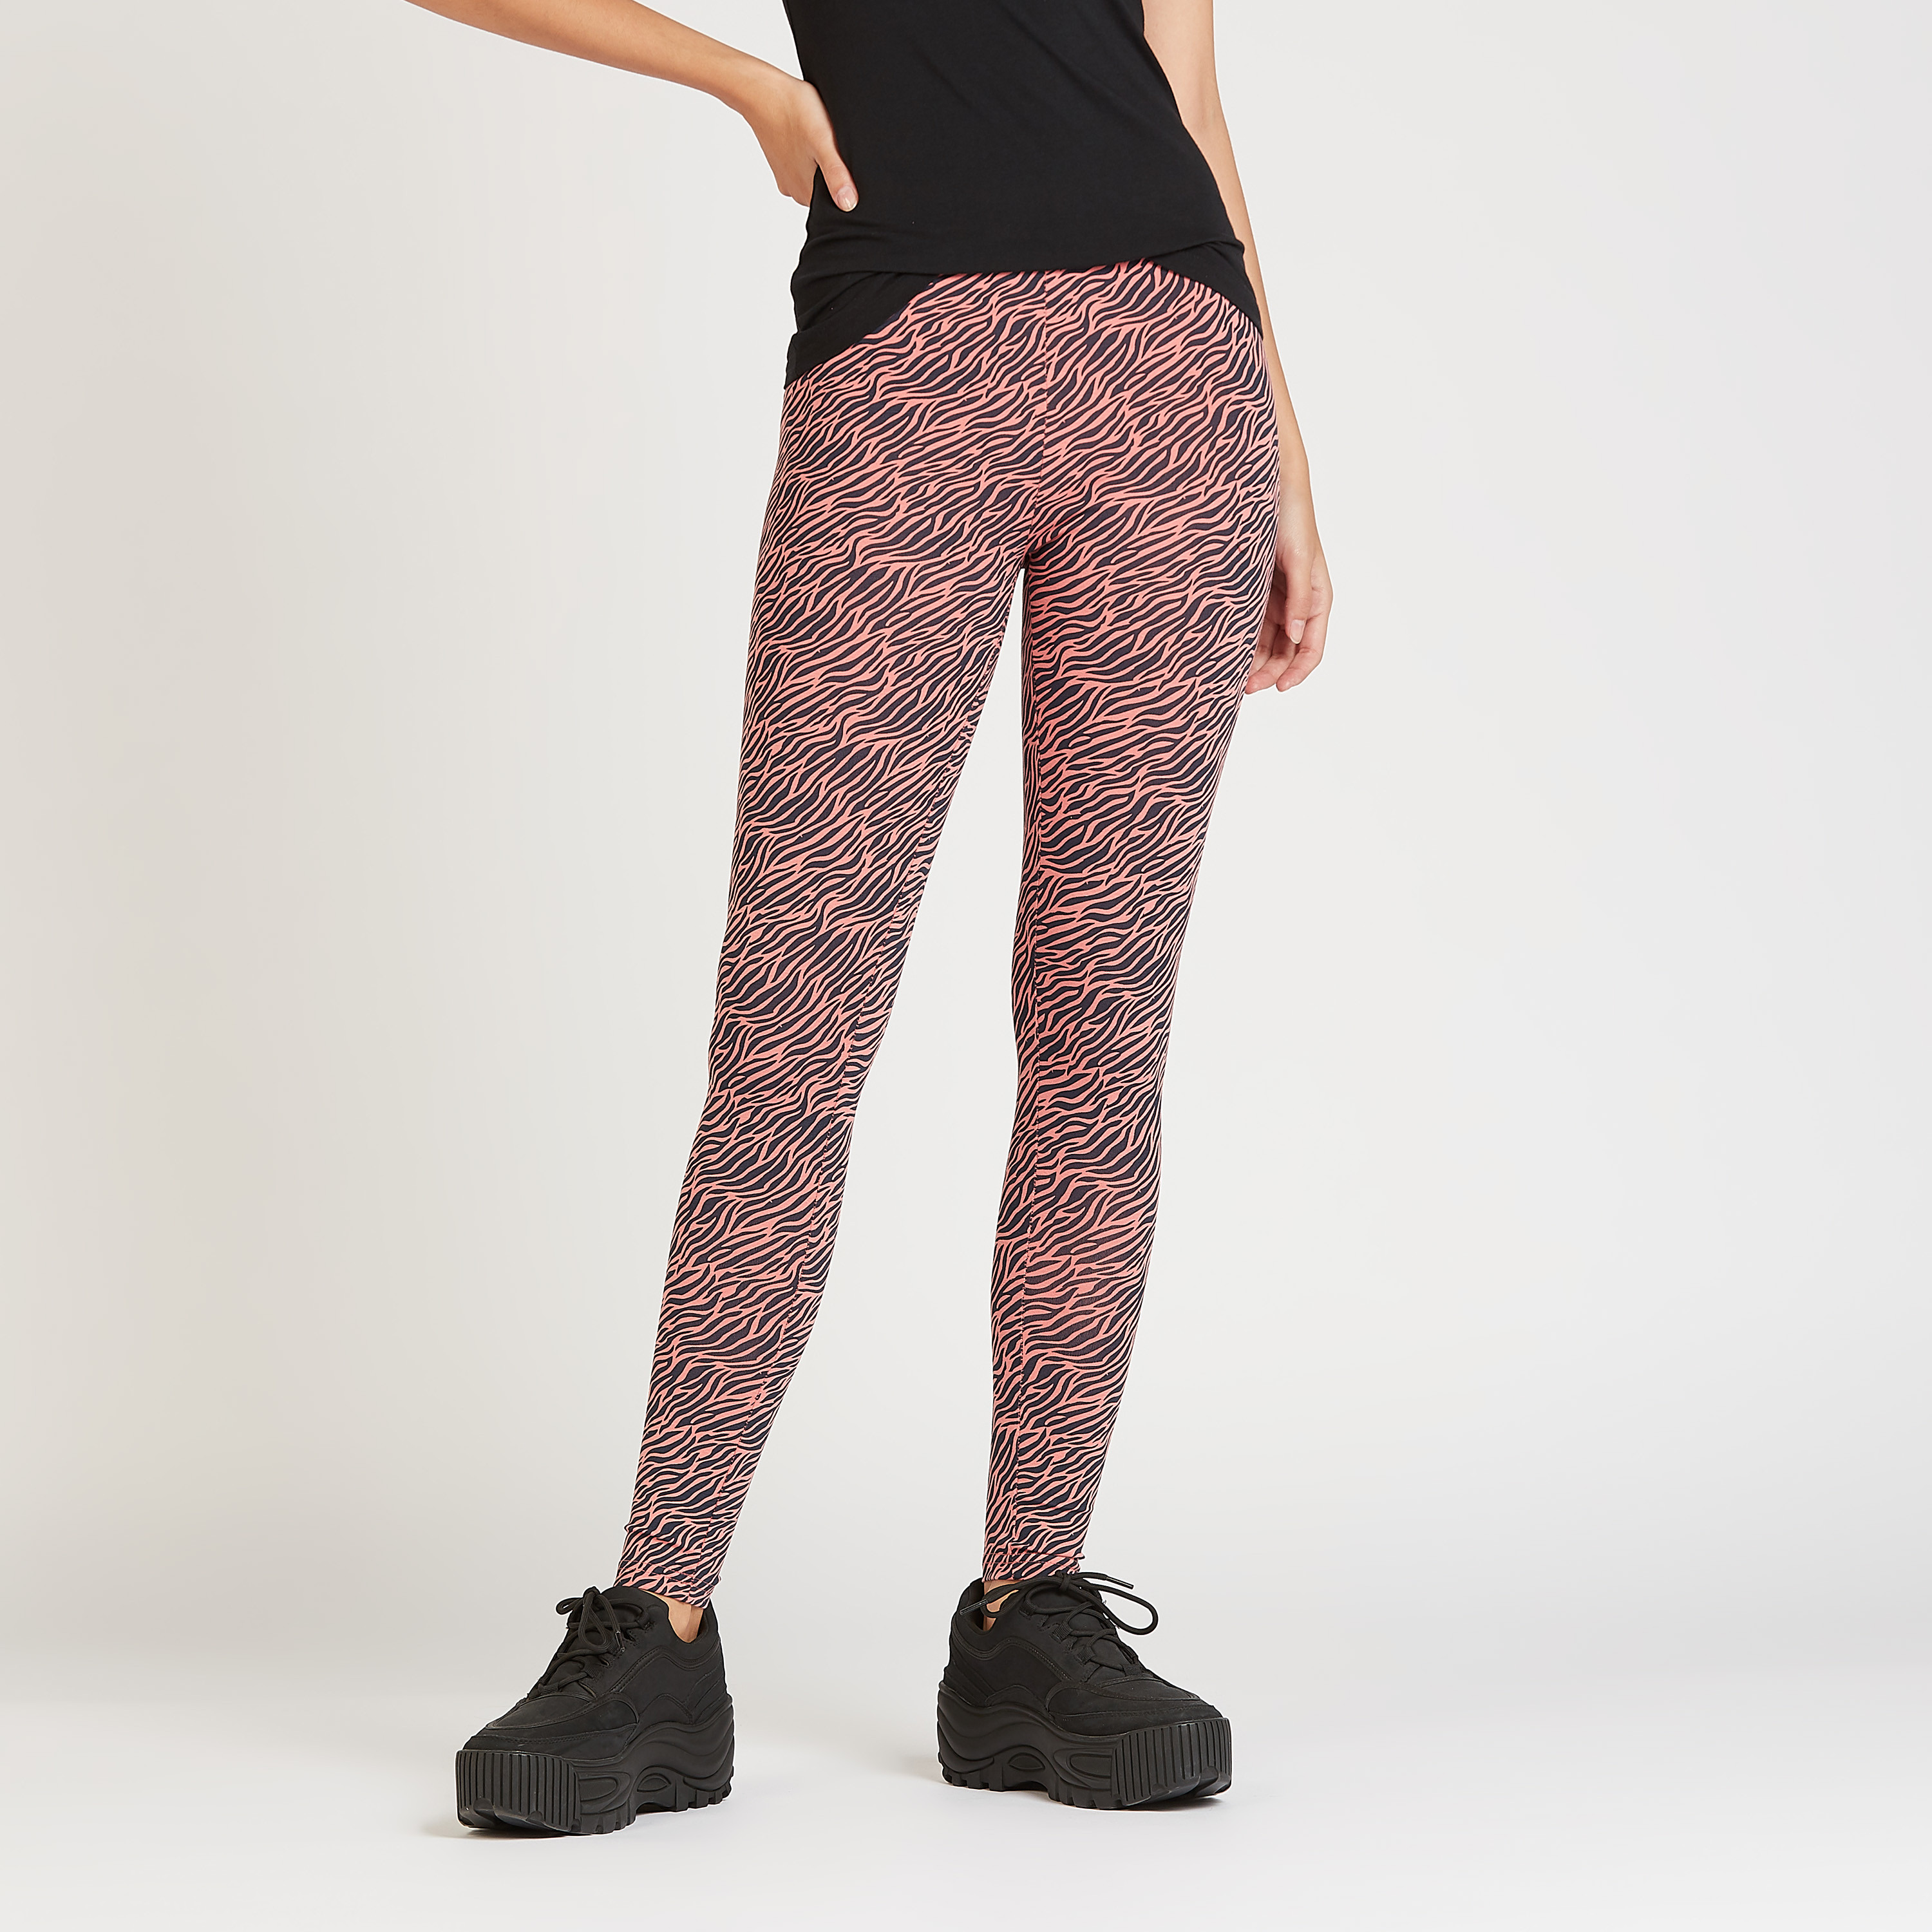 Buy Women's Printed Leggings with Elasticised Waistband Online |  Centrepoint Bahrain